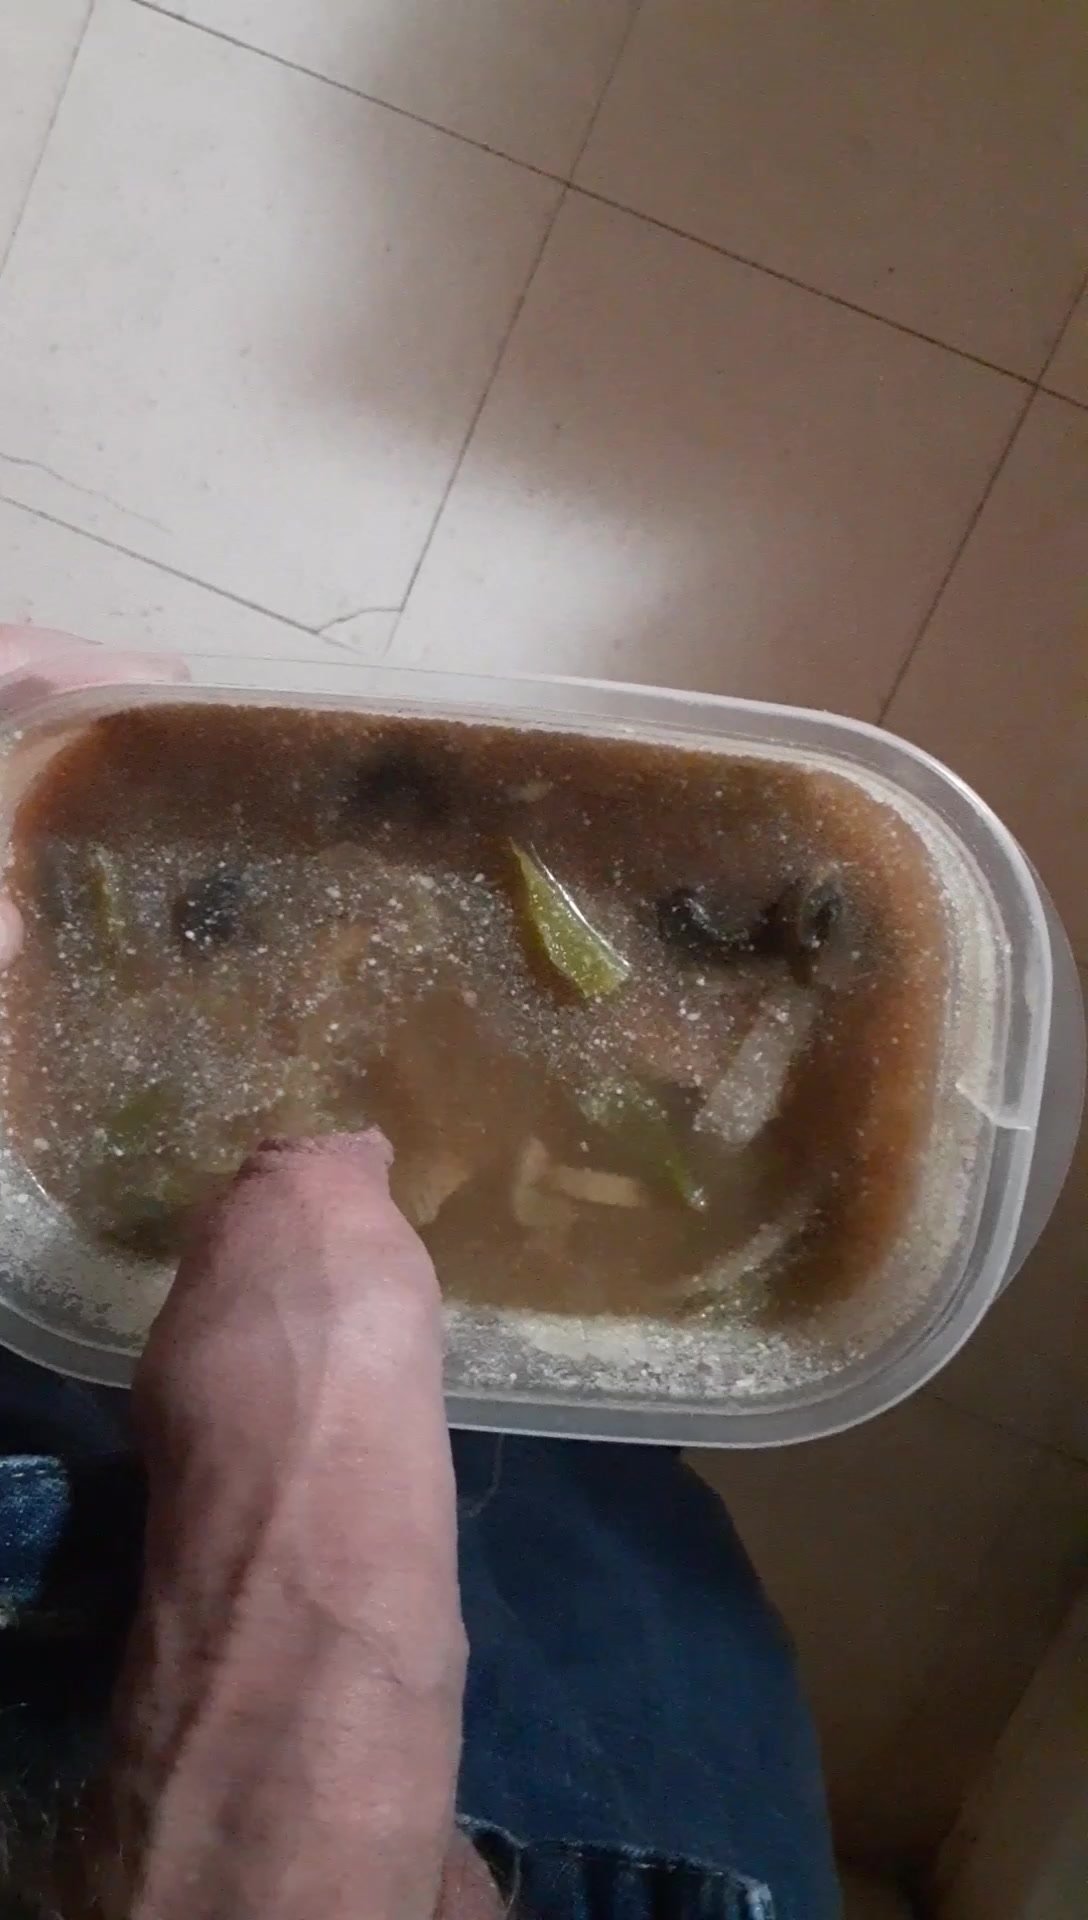 Another piss in my slut mother's food!